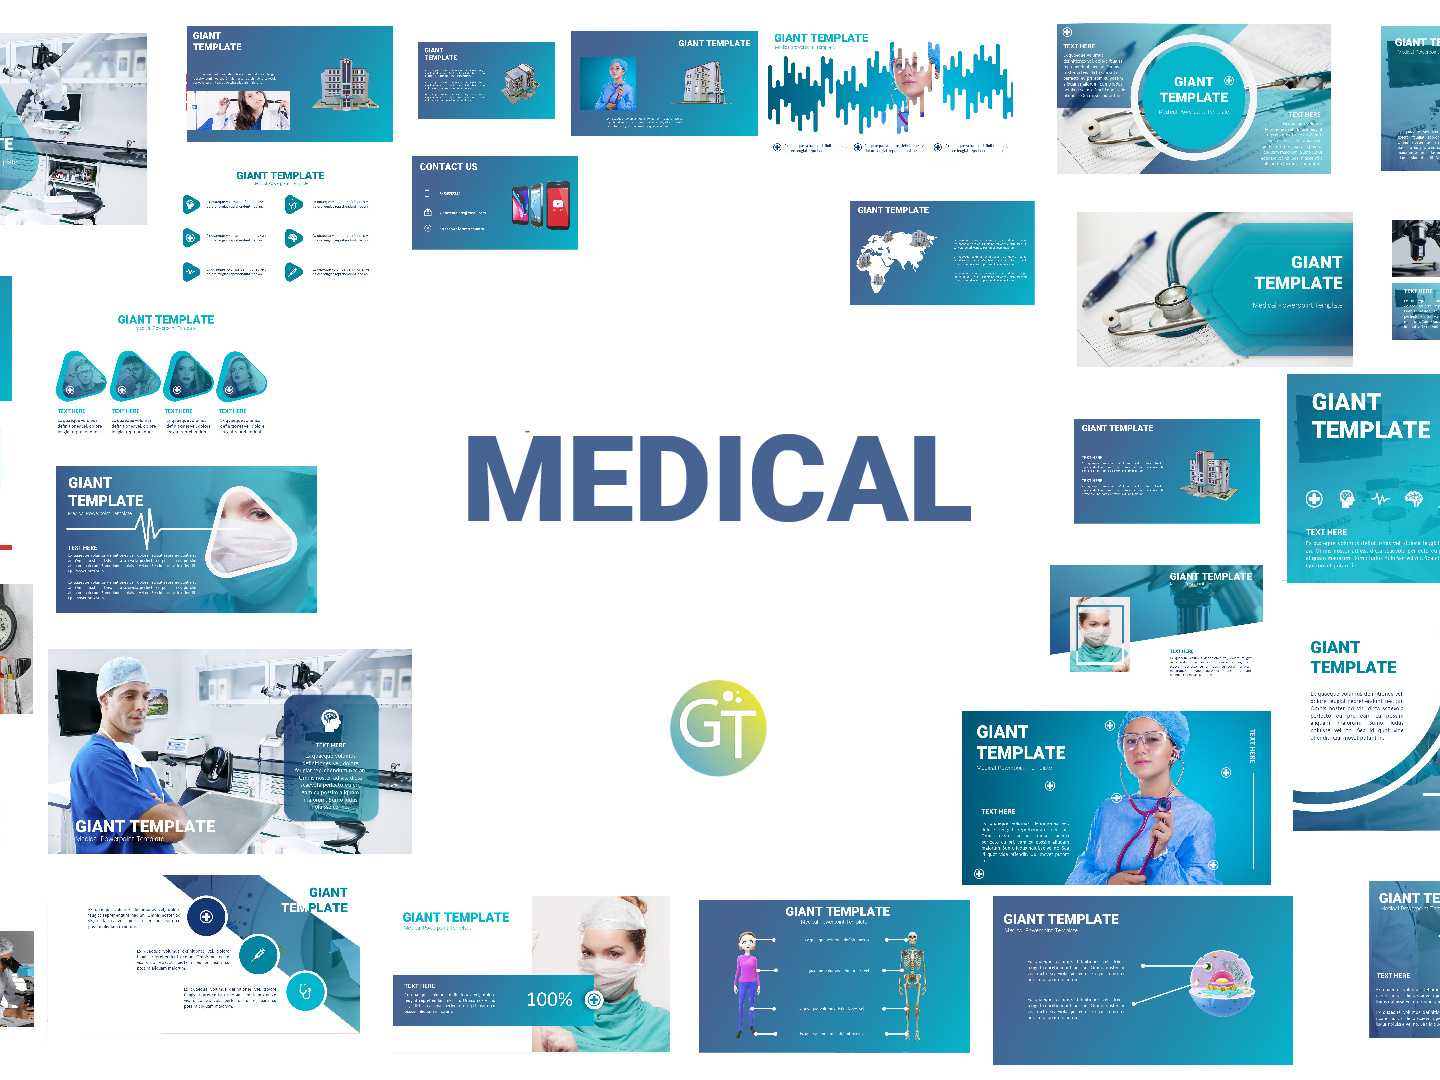 Medical Powerpoint Templates Free Downloadgiant Template With Powerpoint Animation Templates Free Download